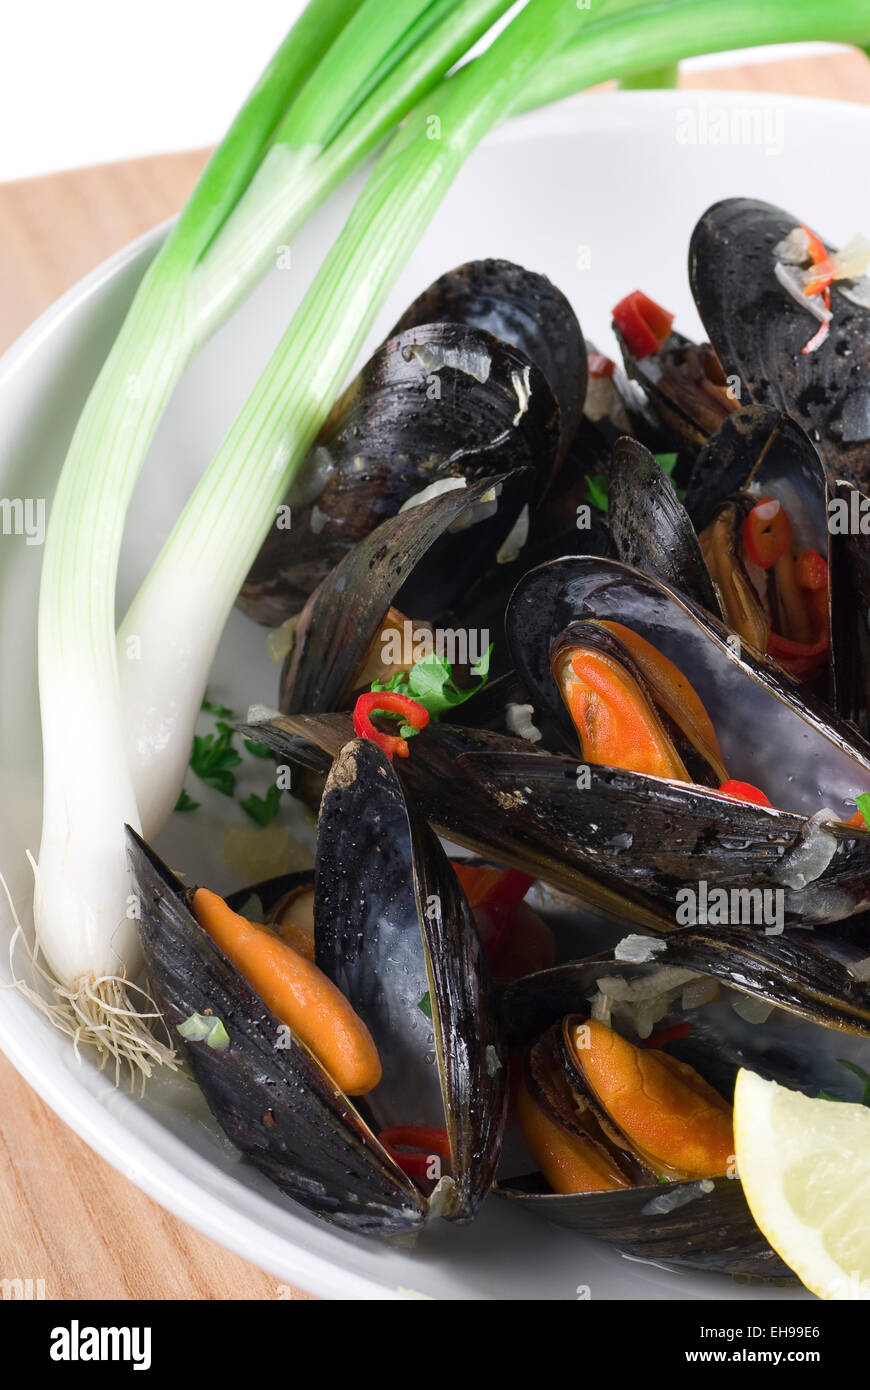 Prepared mussels with onion, chili pepper and parsley. Stock Photo